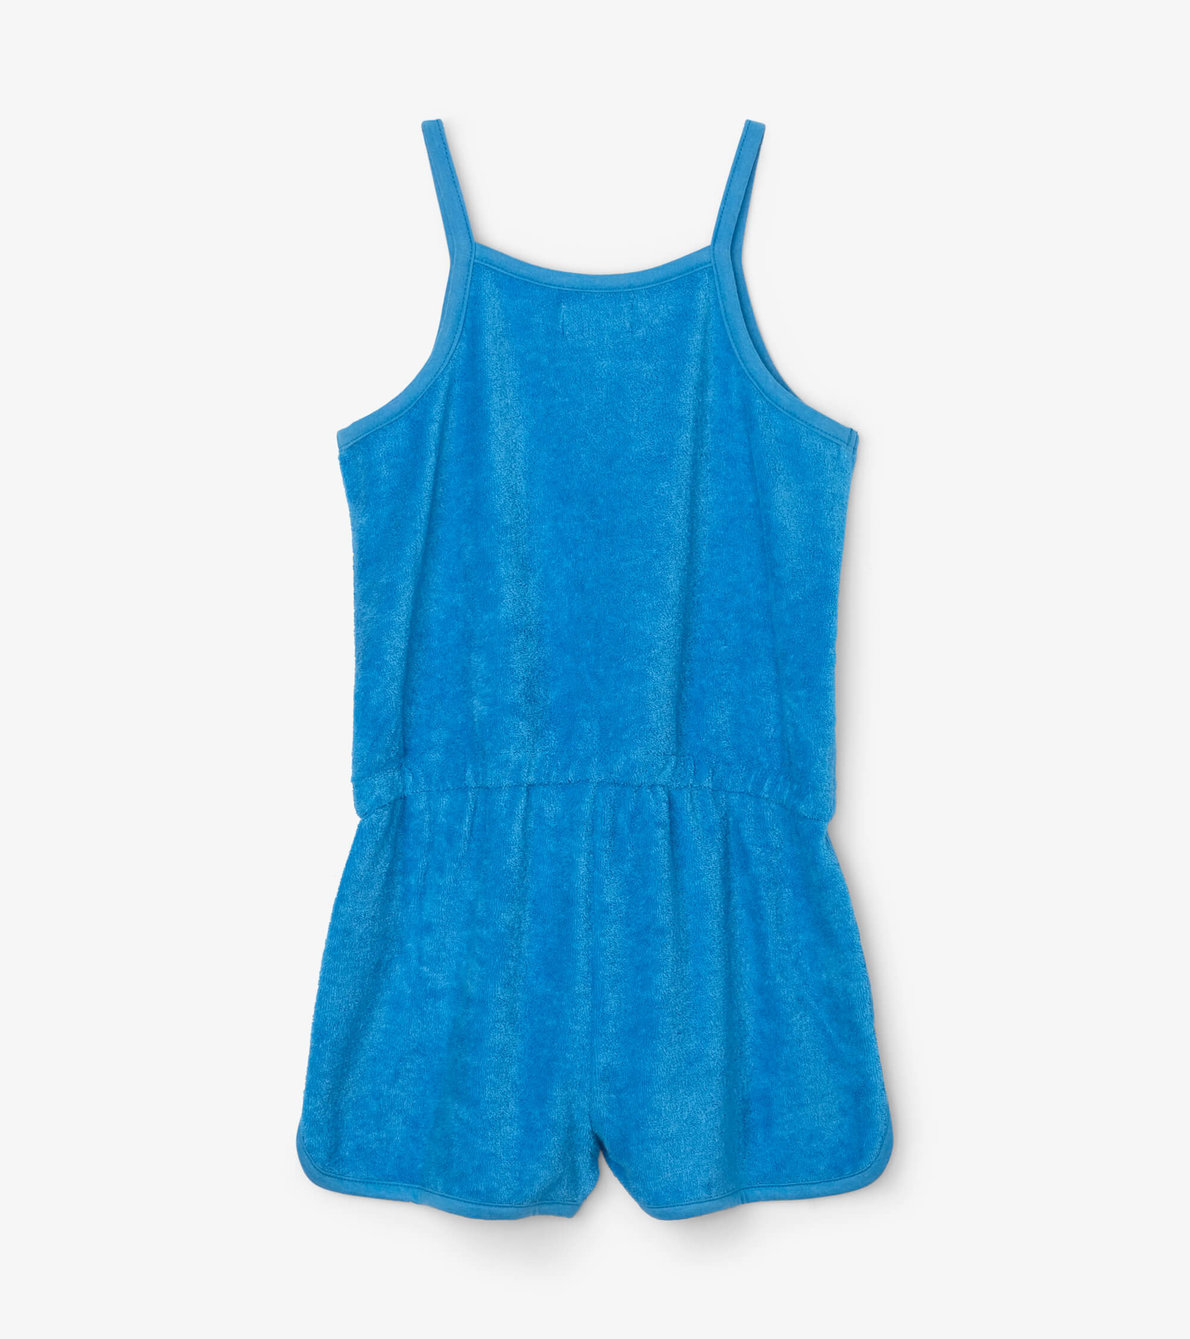 View larger image of Sky Blue Retro Romper